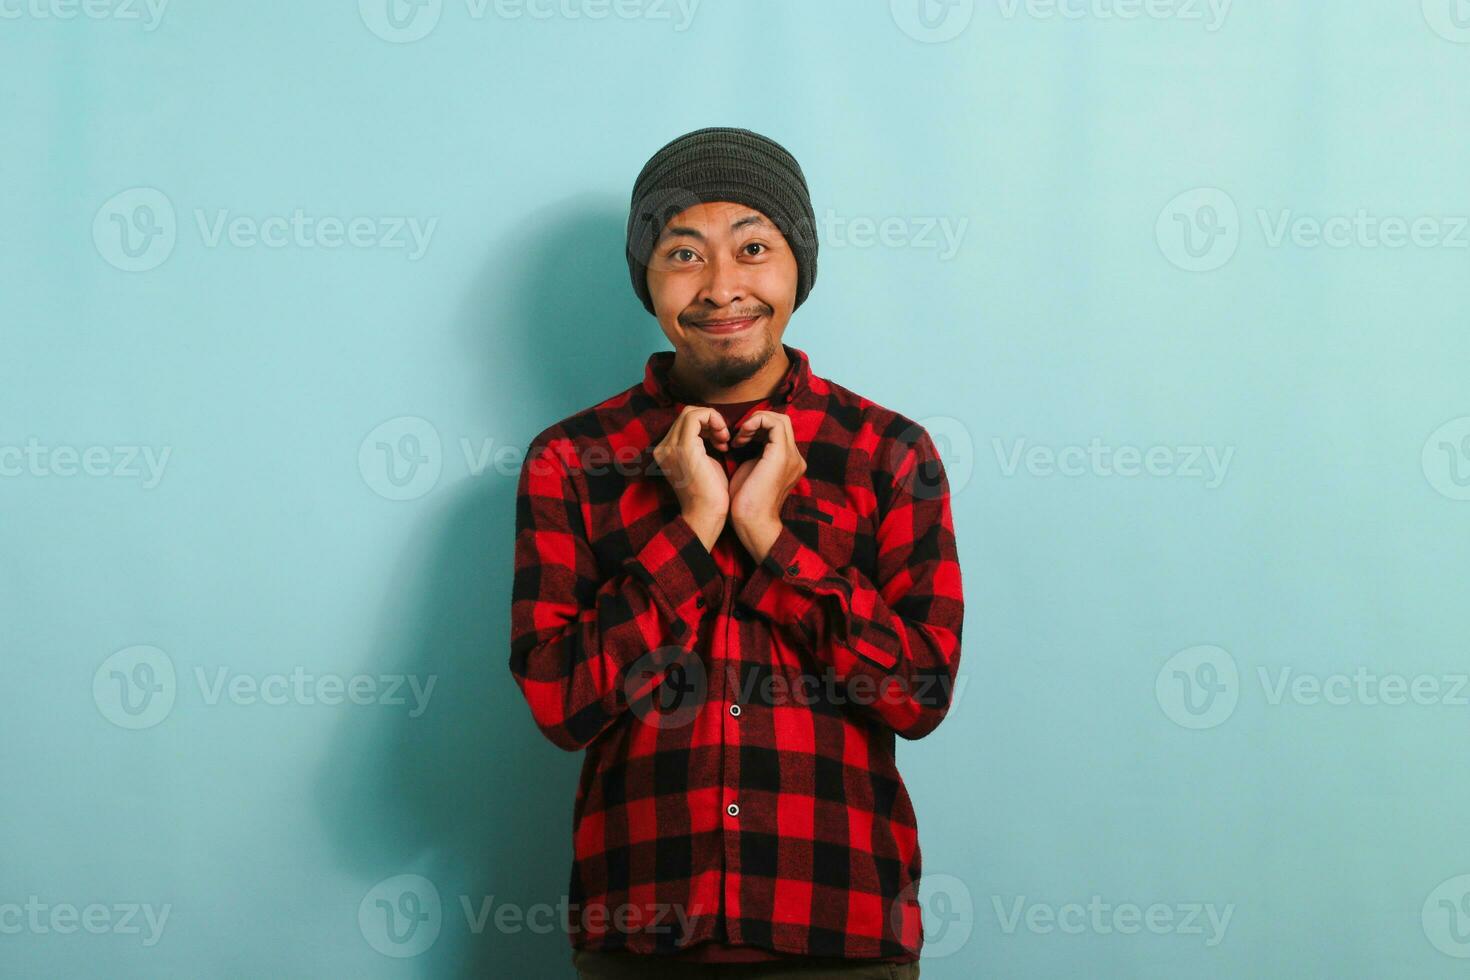 Smiling young Asian man with a beanie hat and a red plaid flannel shirt shows a love gesture with his hand while standing against a blue background photo